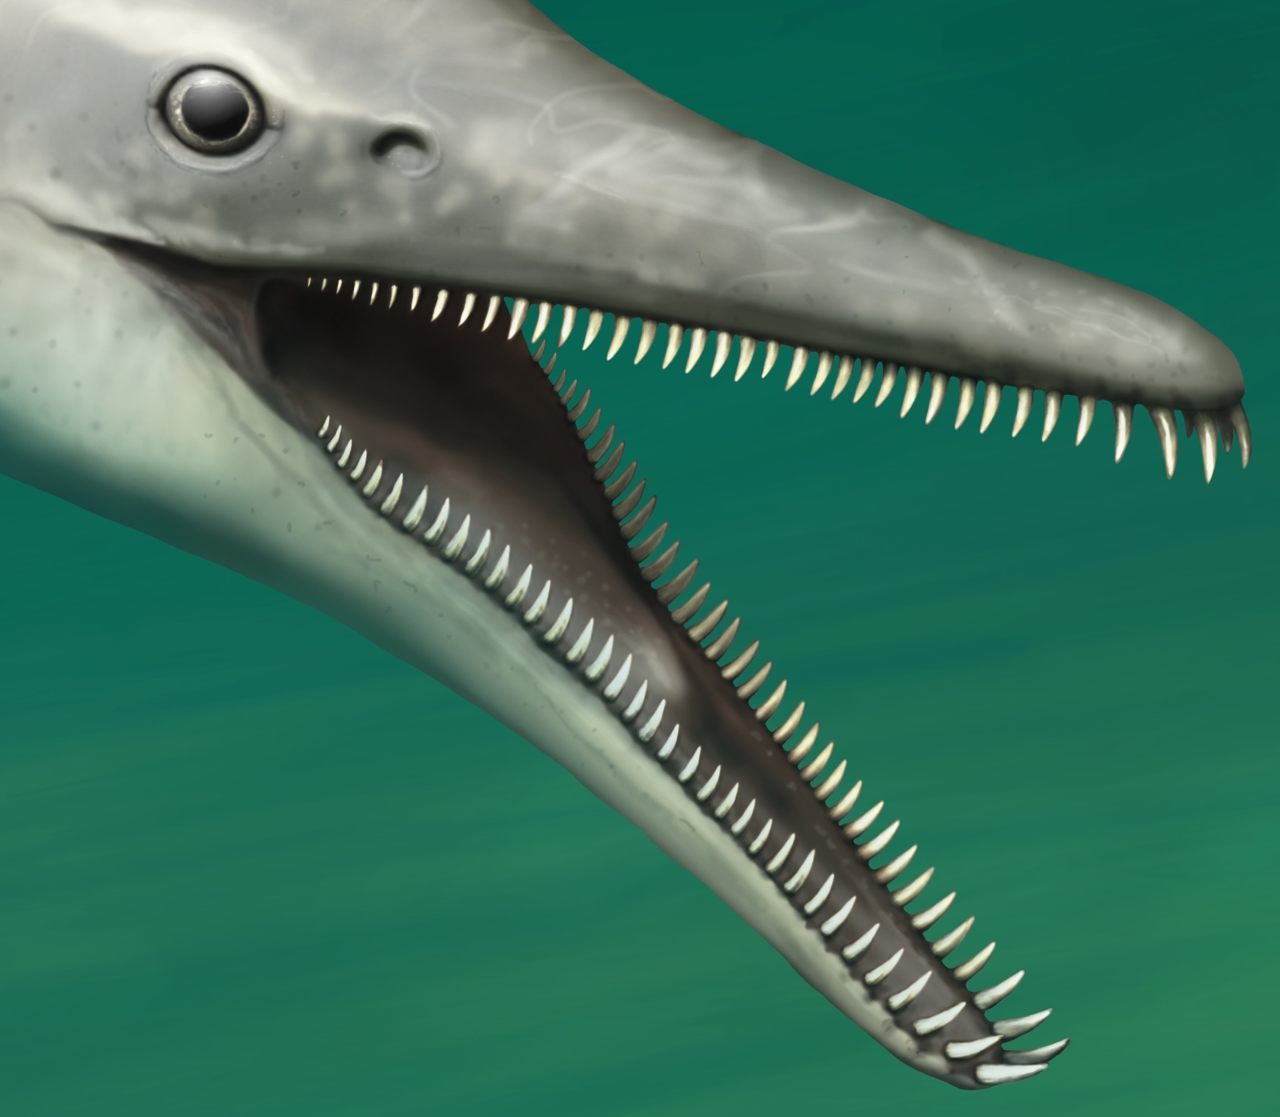 It took two decades for volunteer fossil preparators—the self-described "Glenrock Bone Biddies"—to free the skeleton of this unique plesiosaur from surrounding rock.